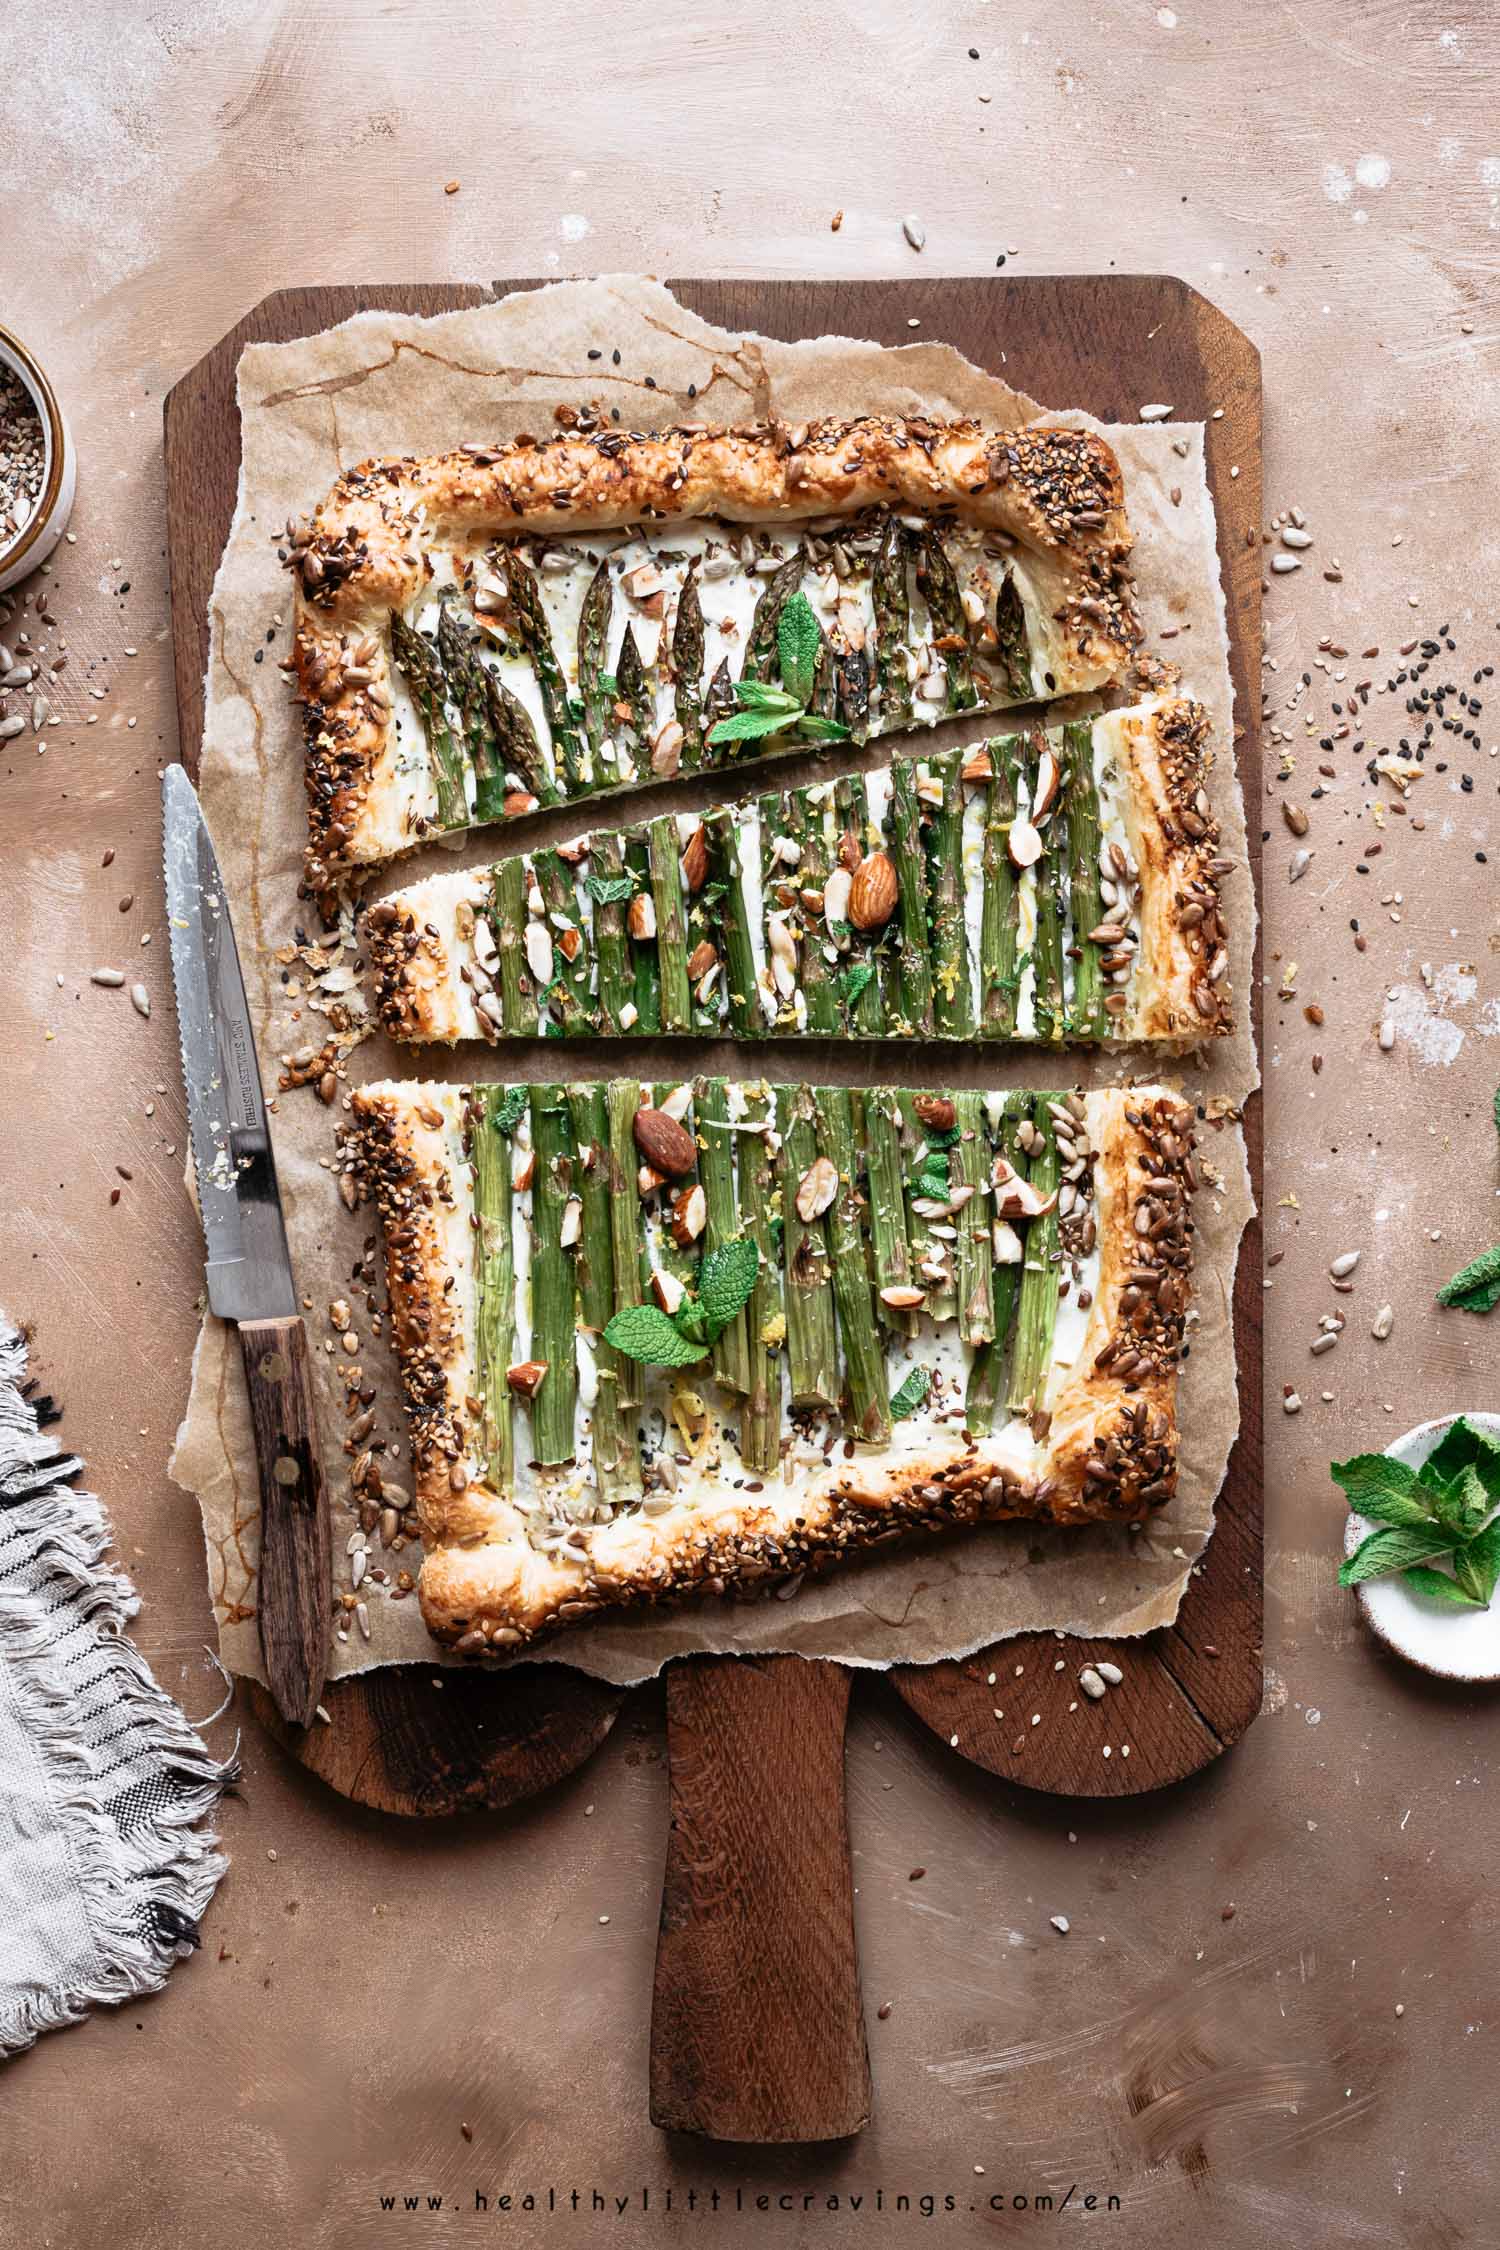 Slices of asparagus ricotta tart with almonds and mint